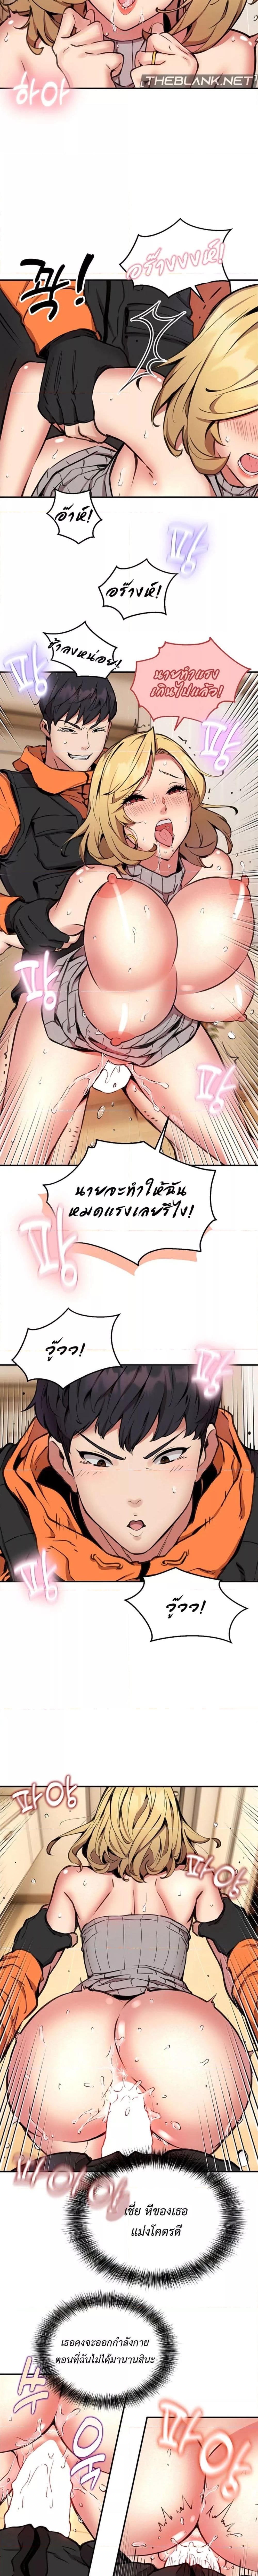 Driver in the New City ตอนที่ 9 ภาพ 9